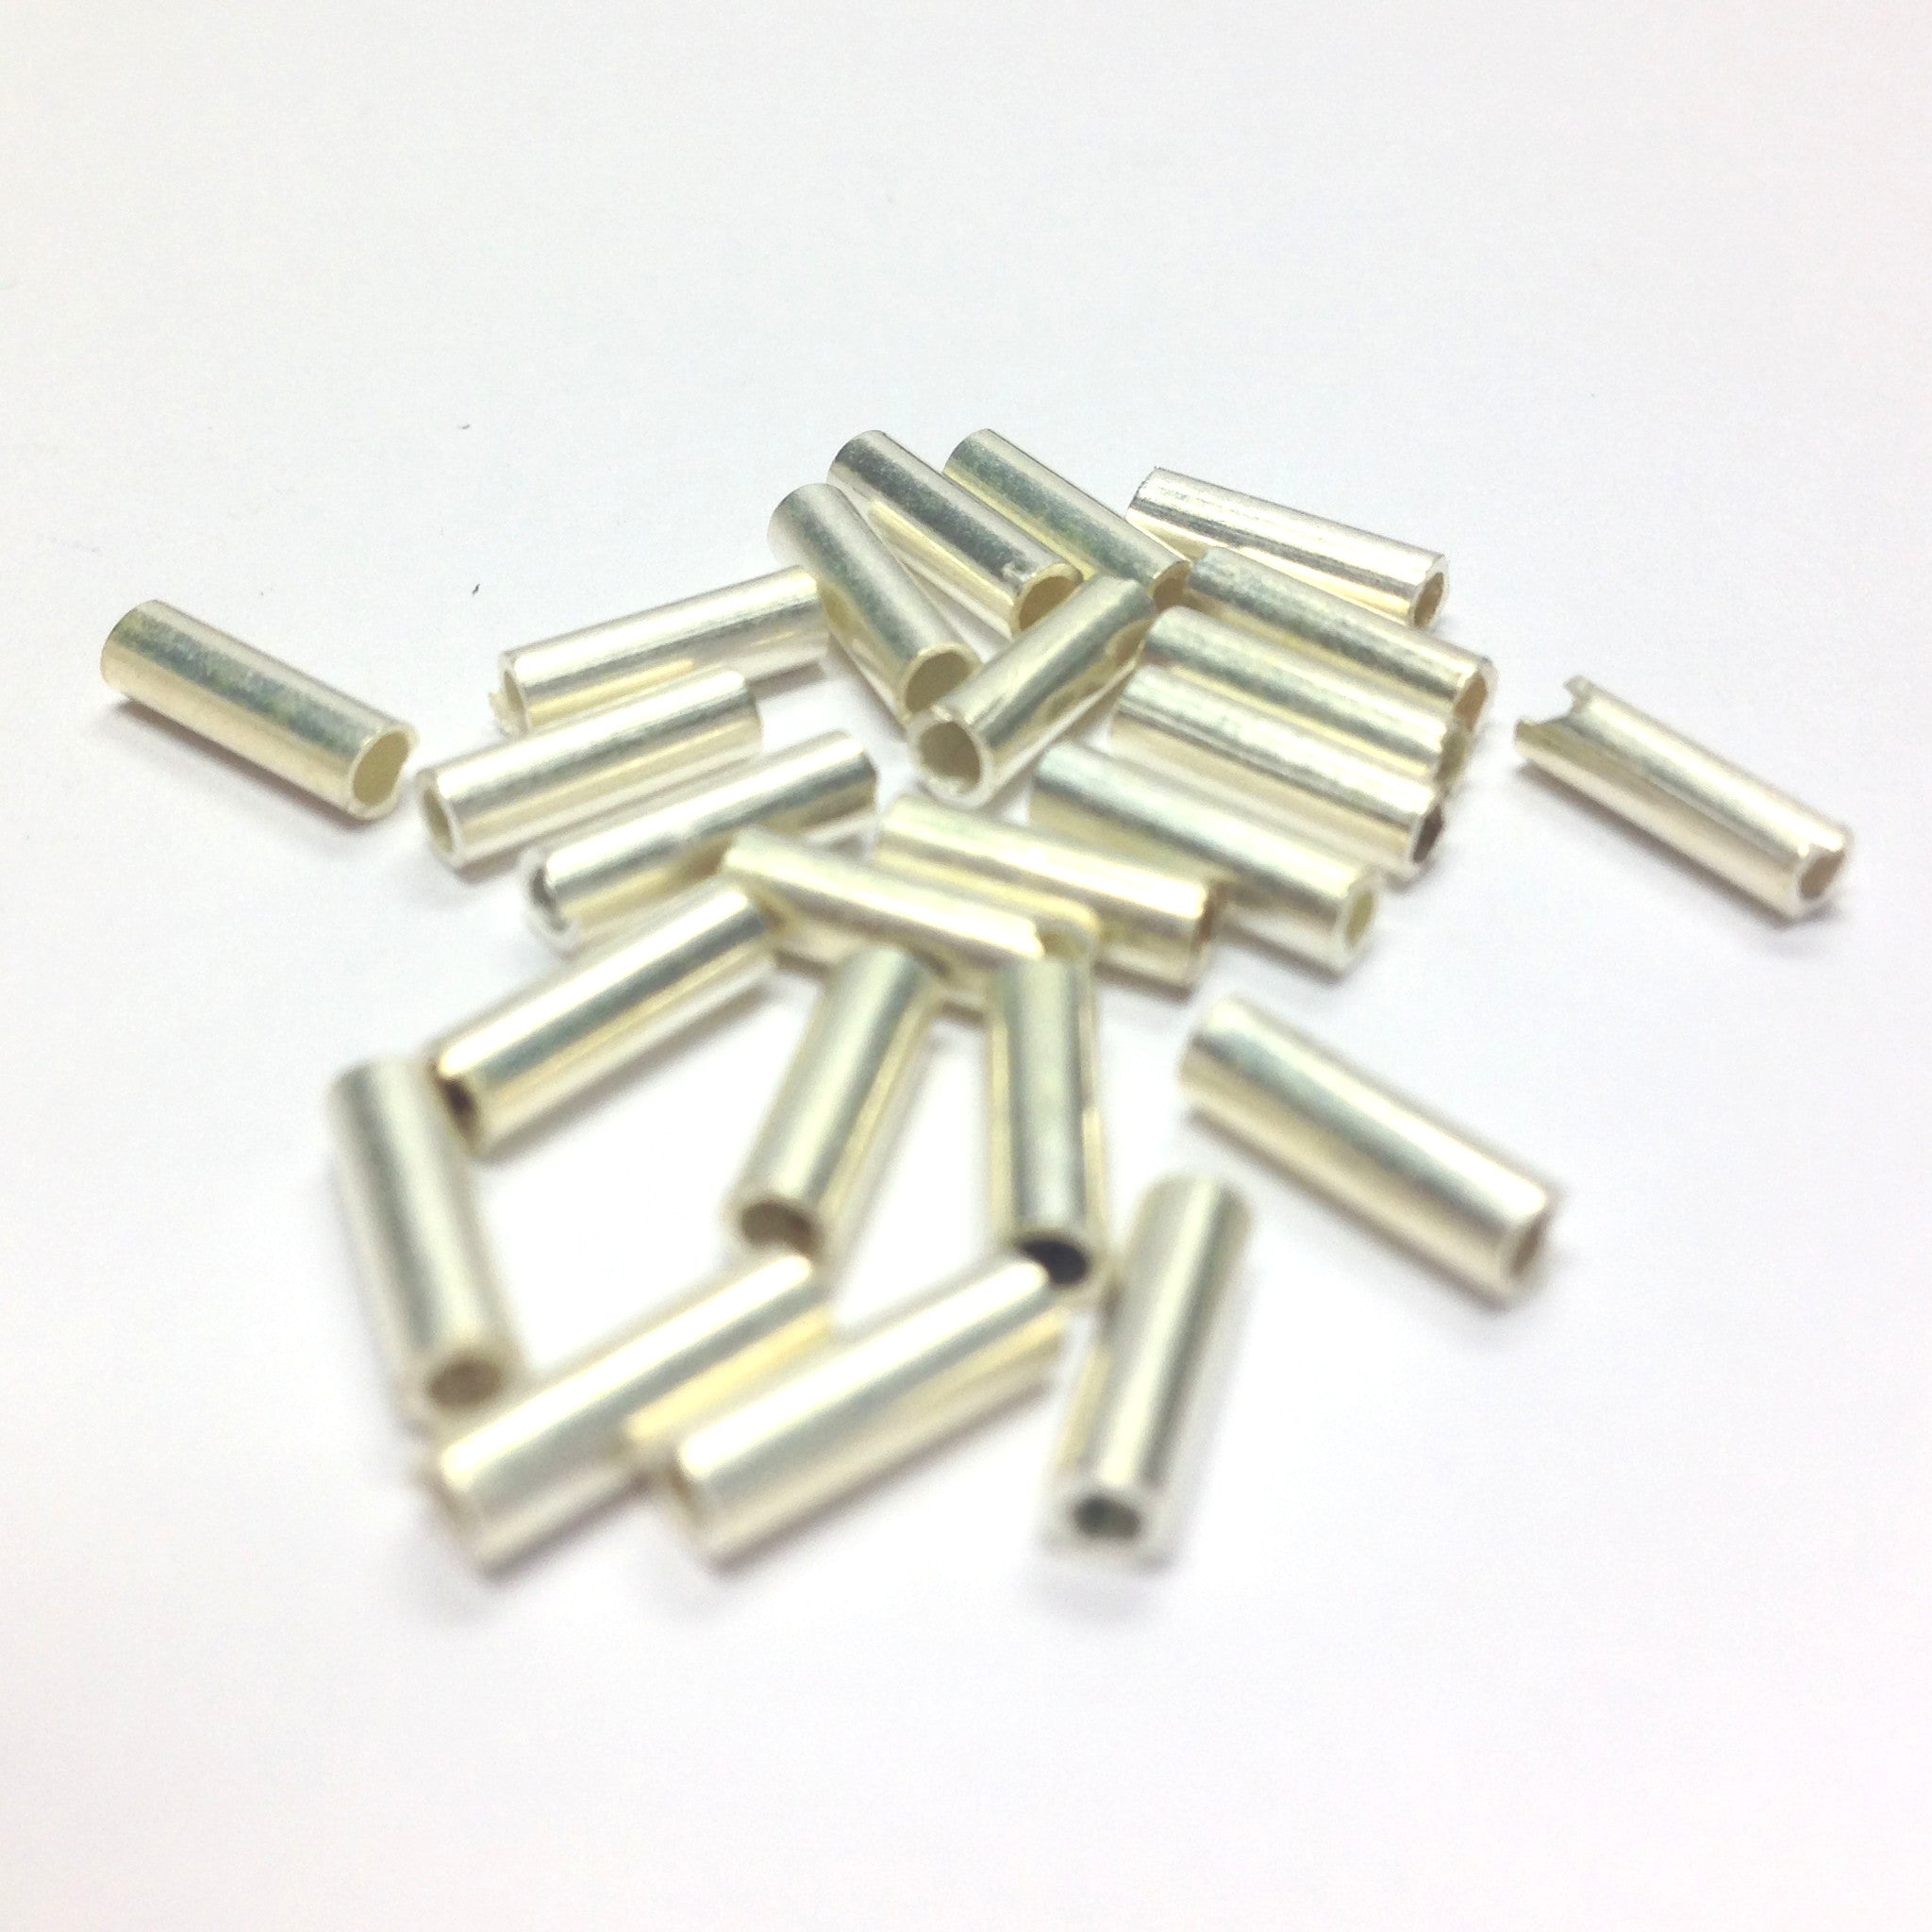 Brass Beads Natural stone shape 5mm hole size 1.5mm